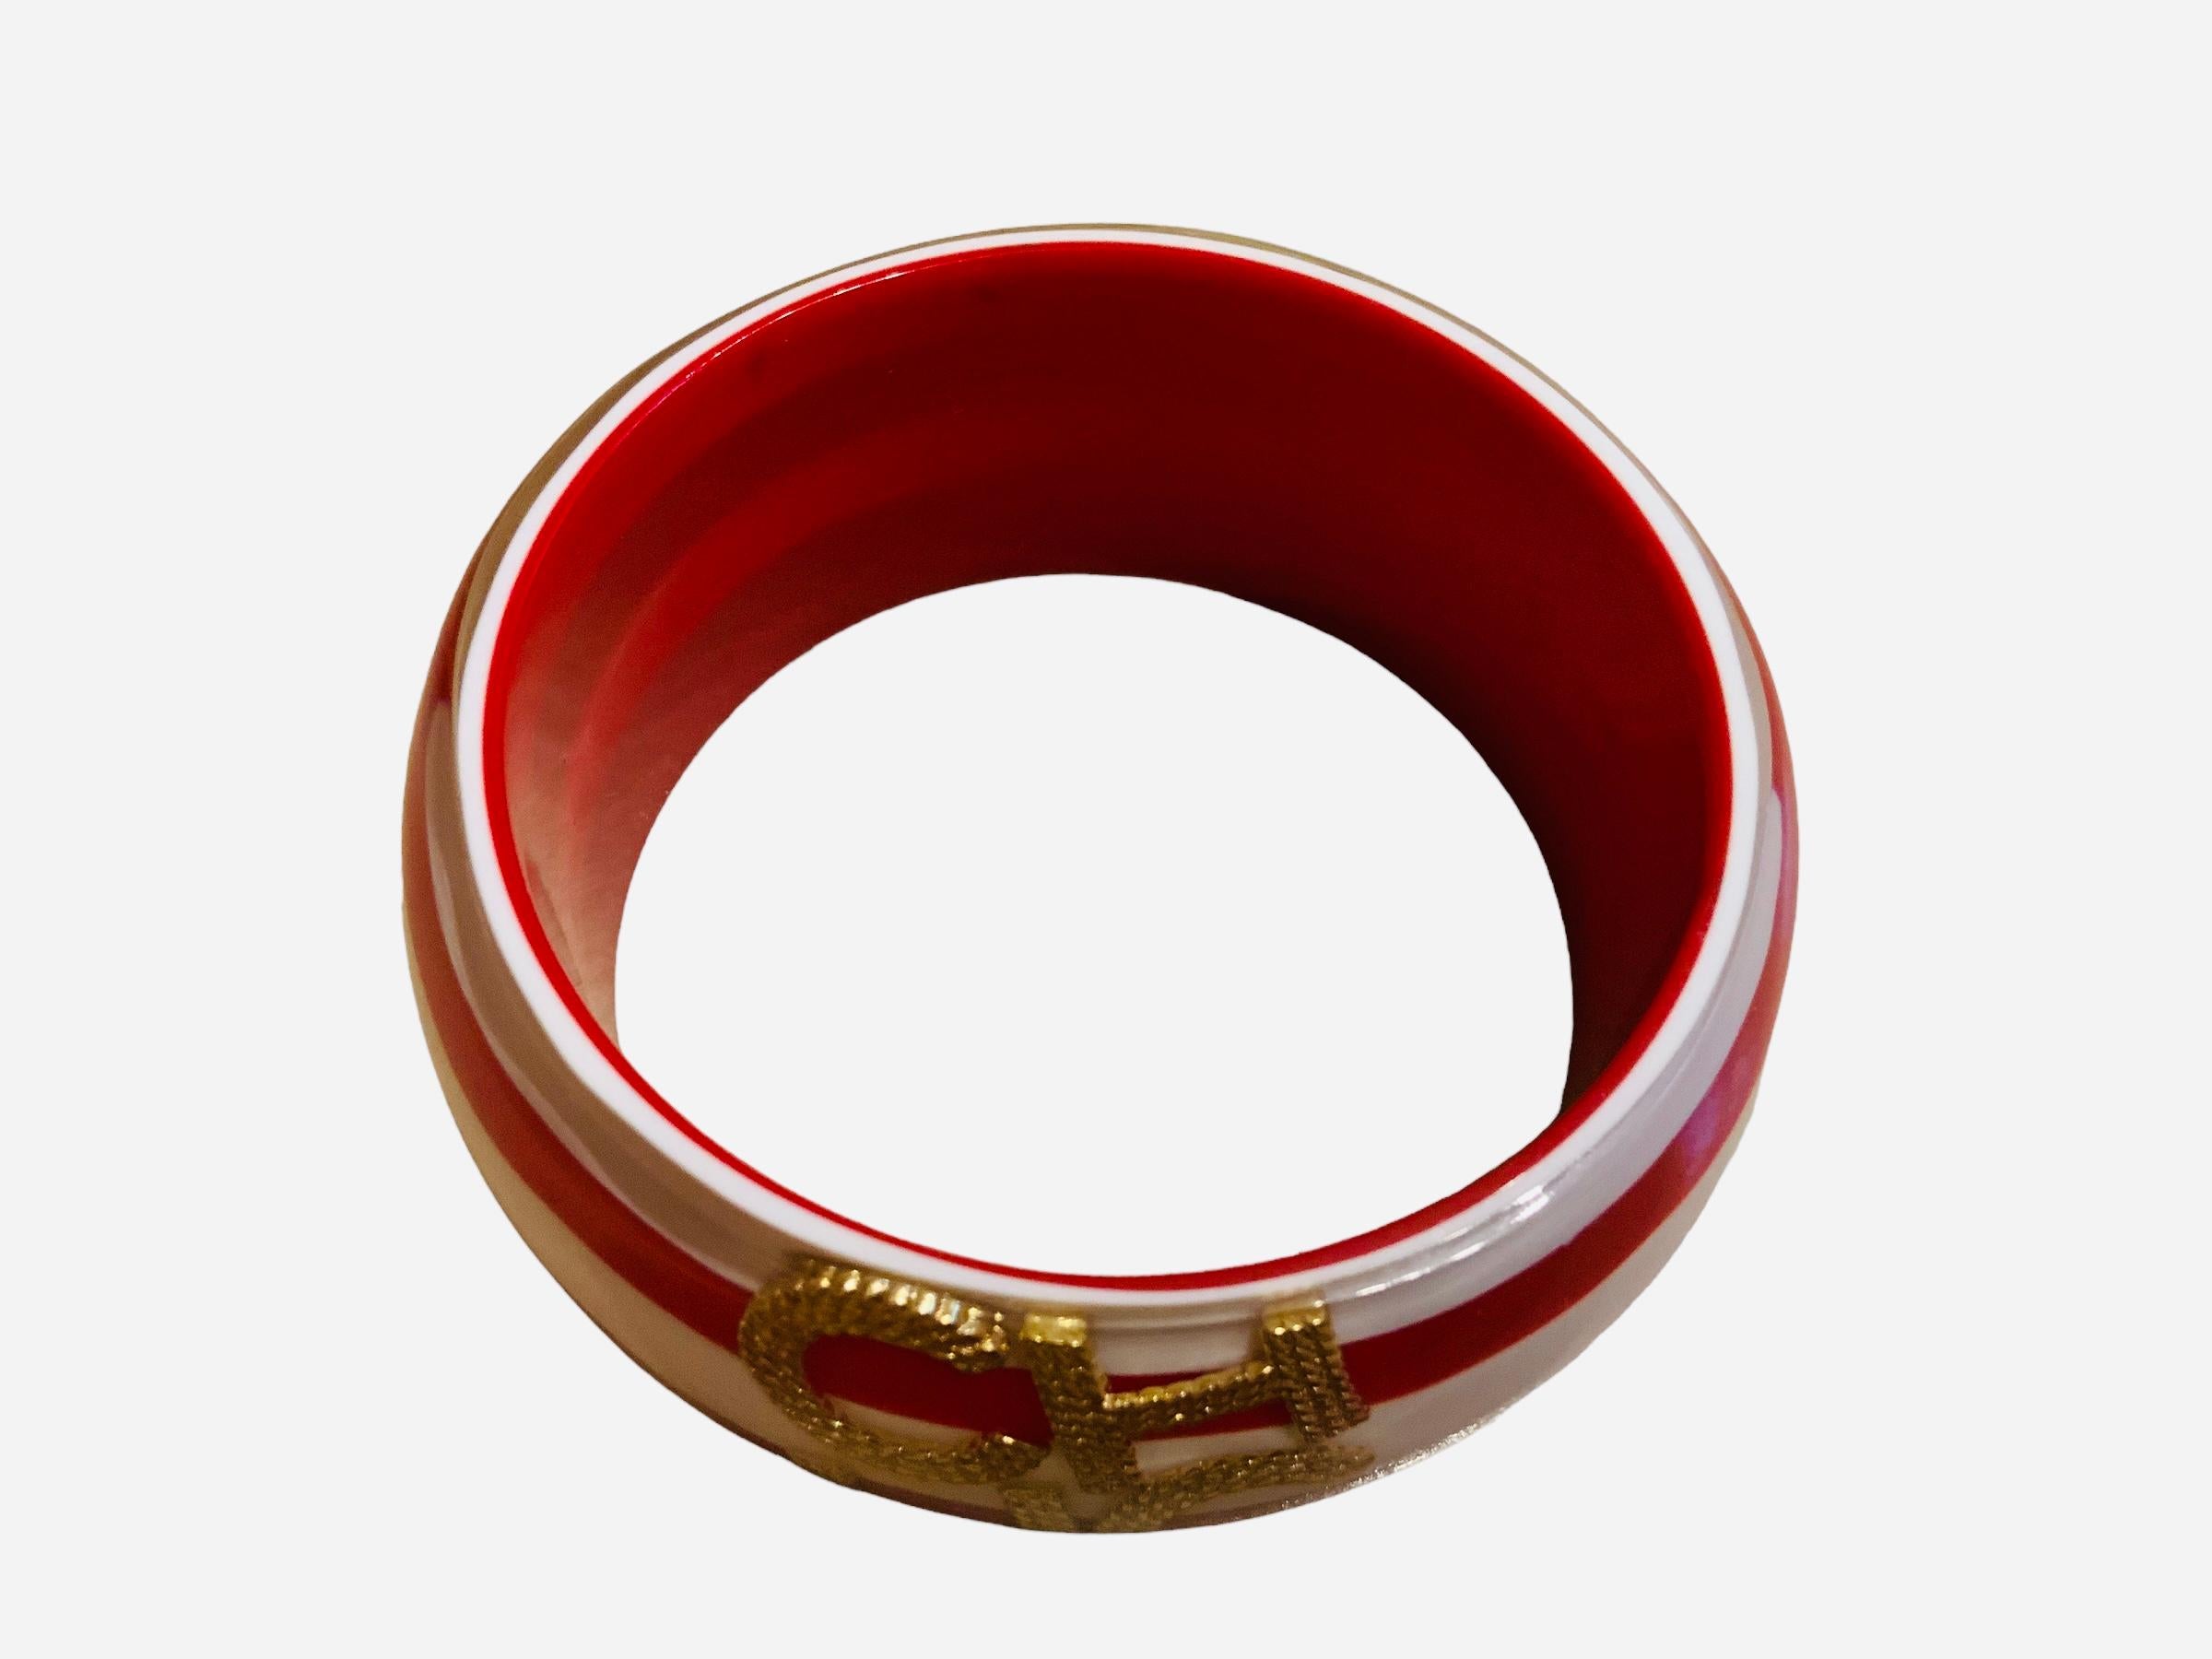 This is a Carolina Herrera red and white resin bangle. It depicts a red and white “peppermint starlights” pattern. It is adorned in the center with gold tone double upper case initials of CH from Carolina Herrera.